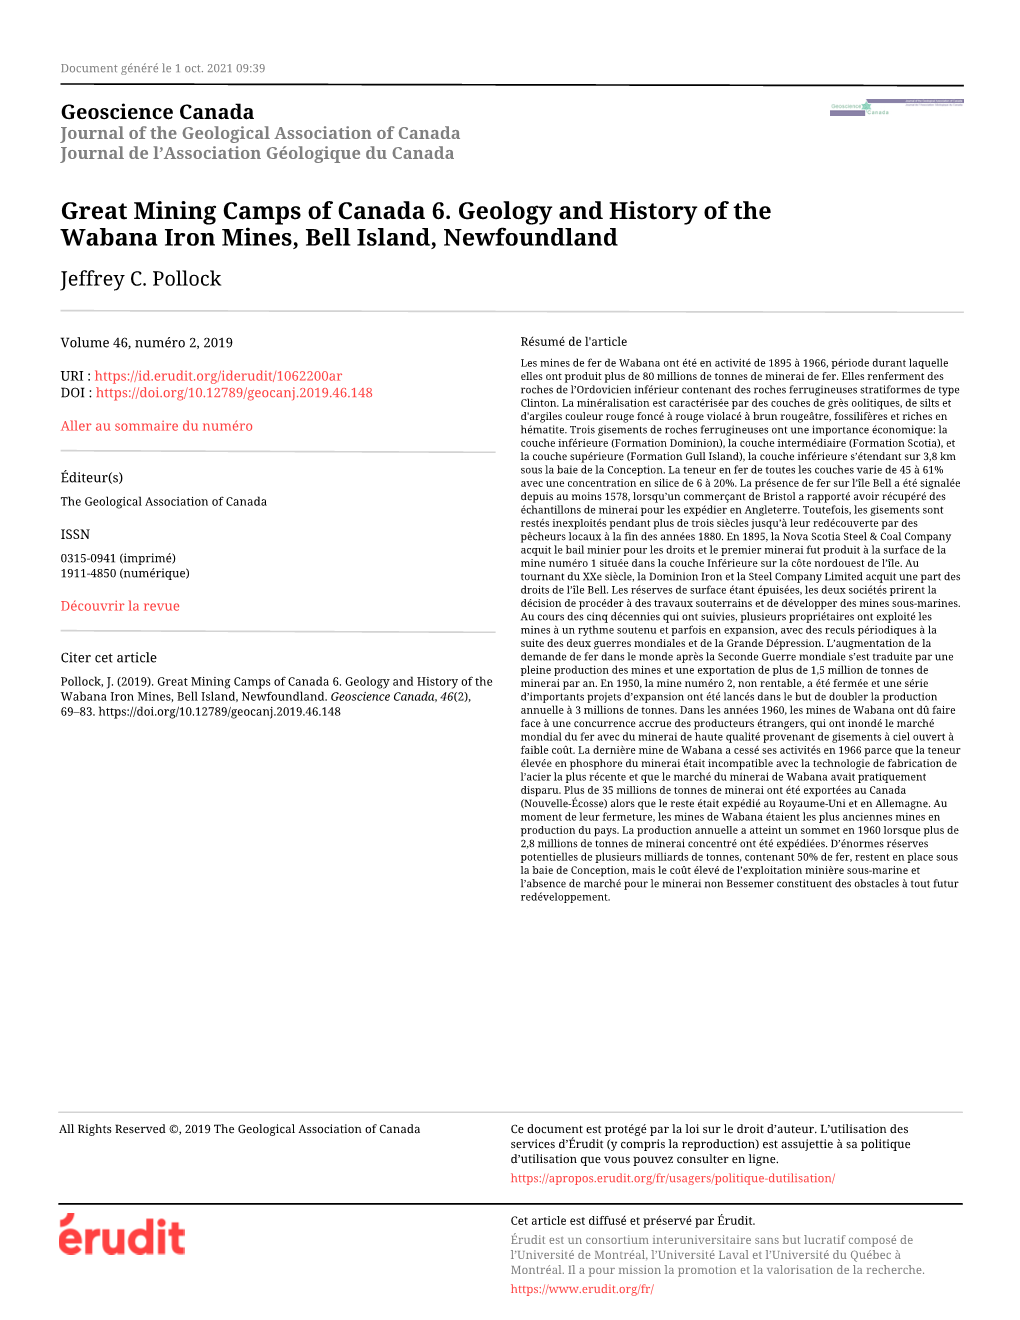 Great Mining Camps of Canada 6. Geology and History of the Wabana Iron Mines, Bell Island, Newfoundland Jeffrey C